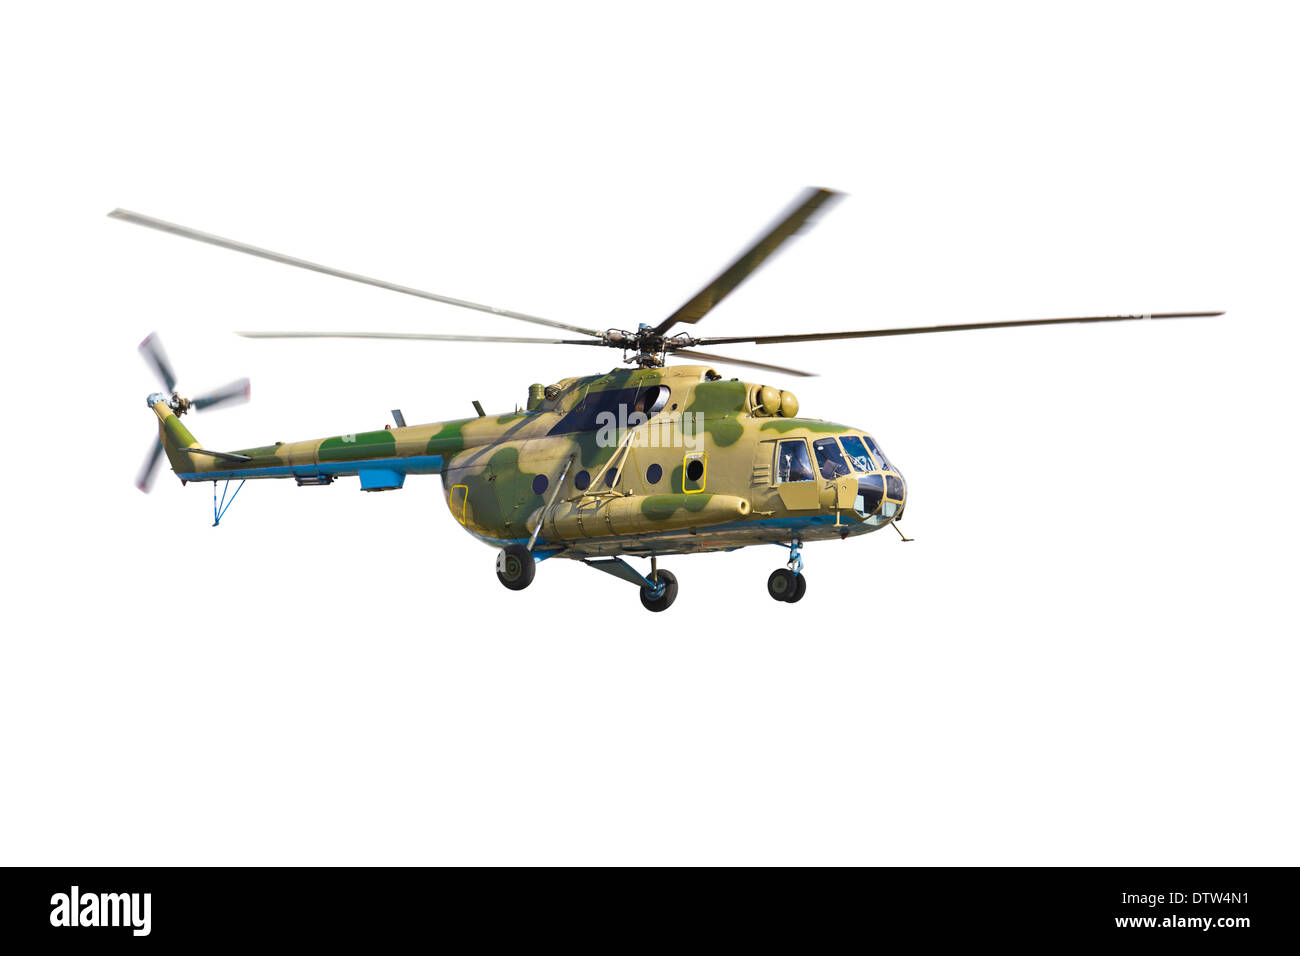 Military helicopter Stock Photo